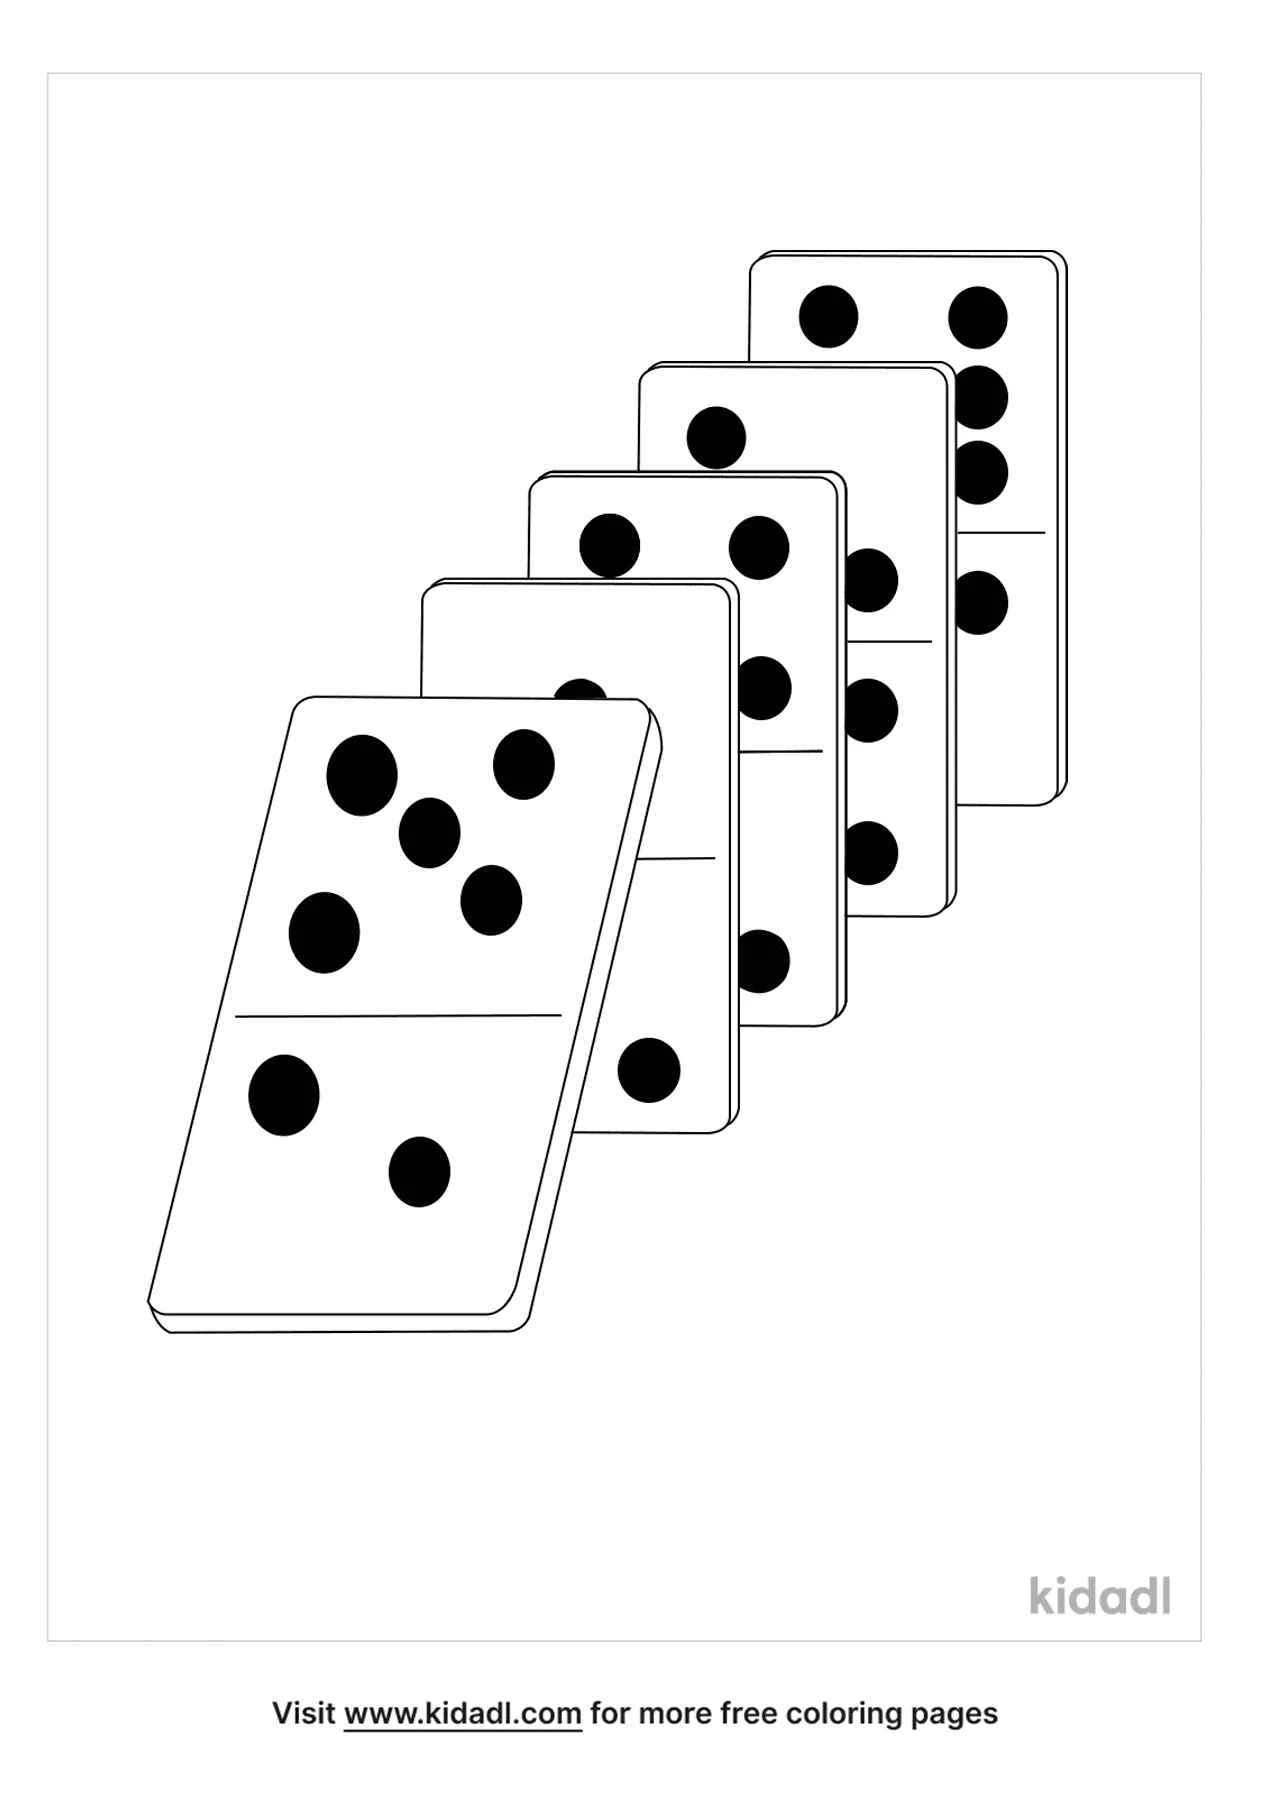 Free domino chain coloring page coloring page printables